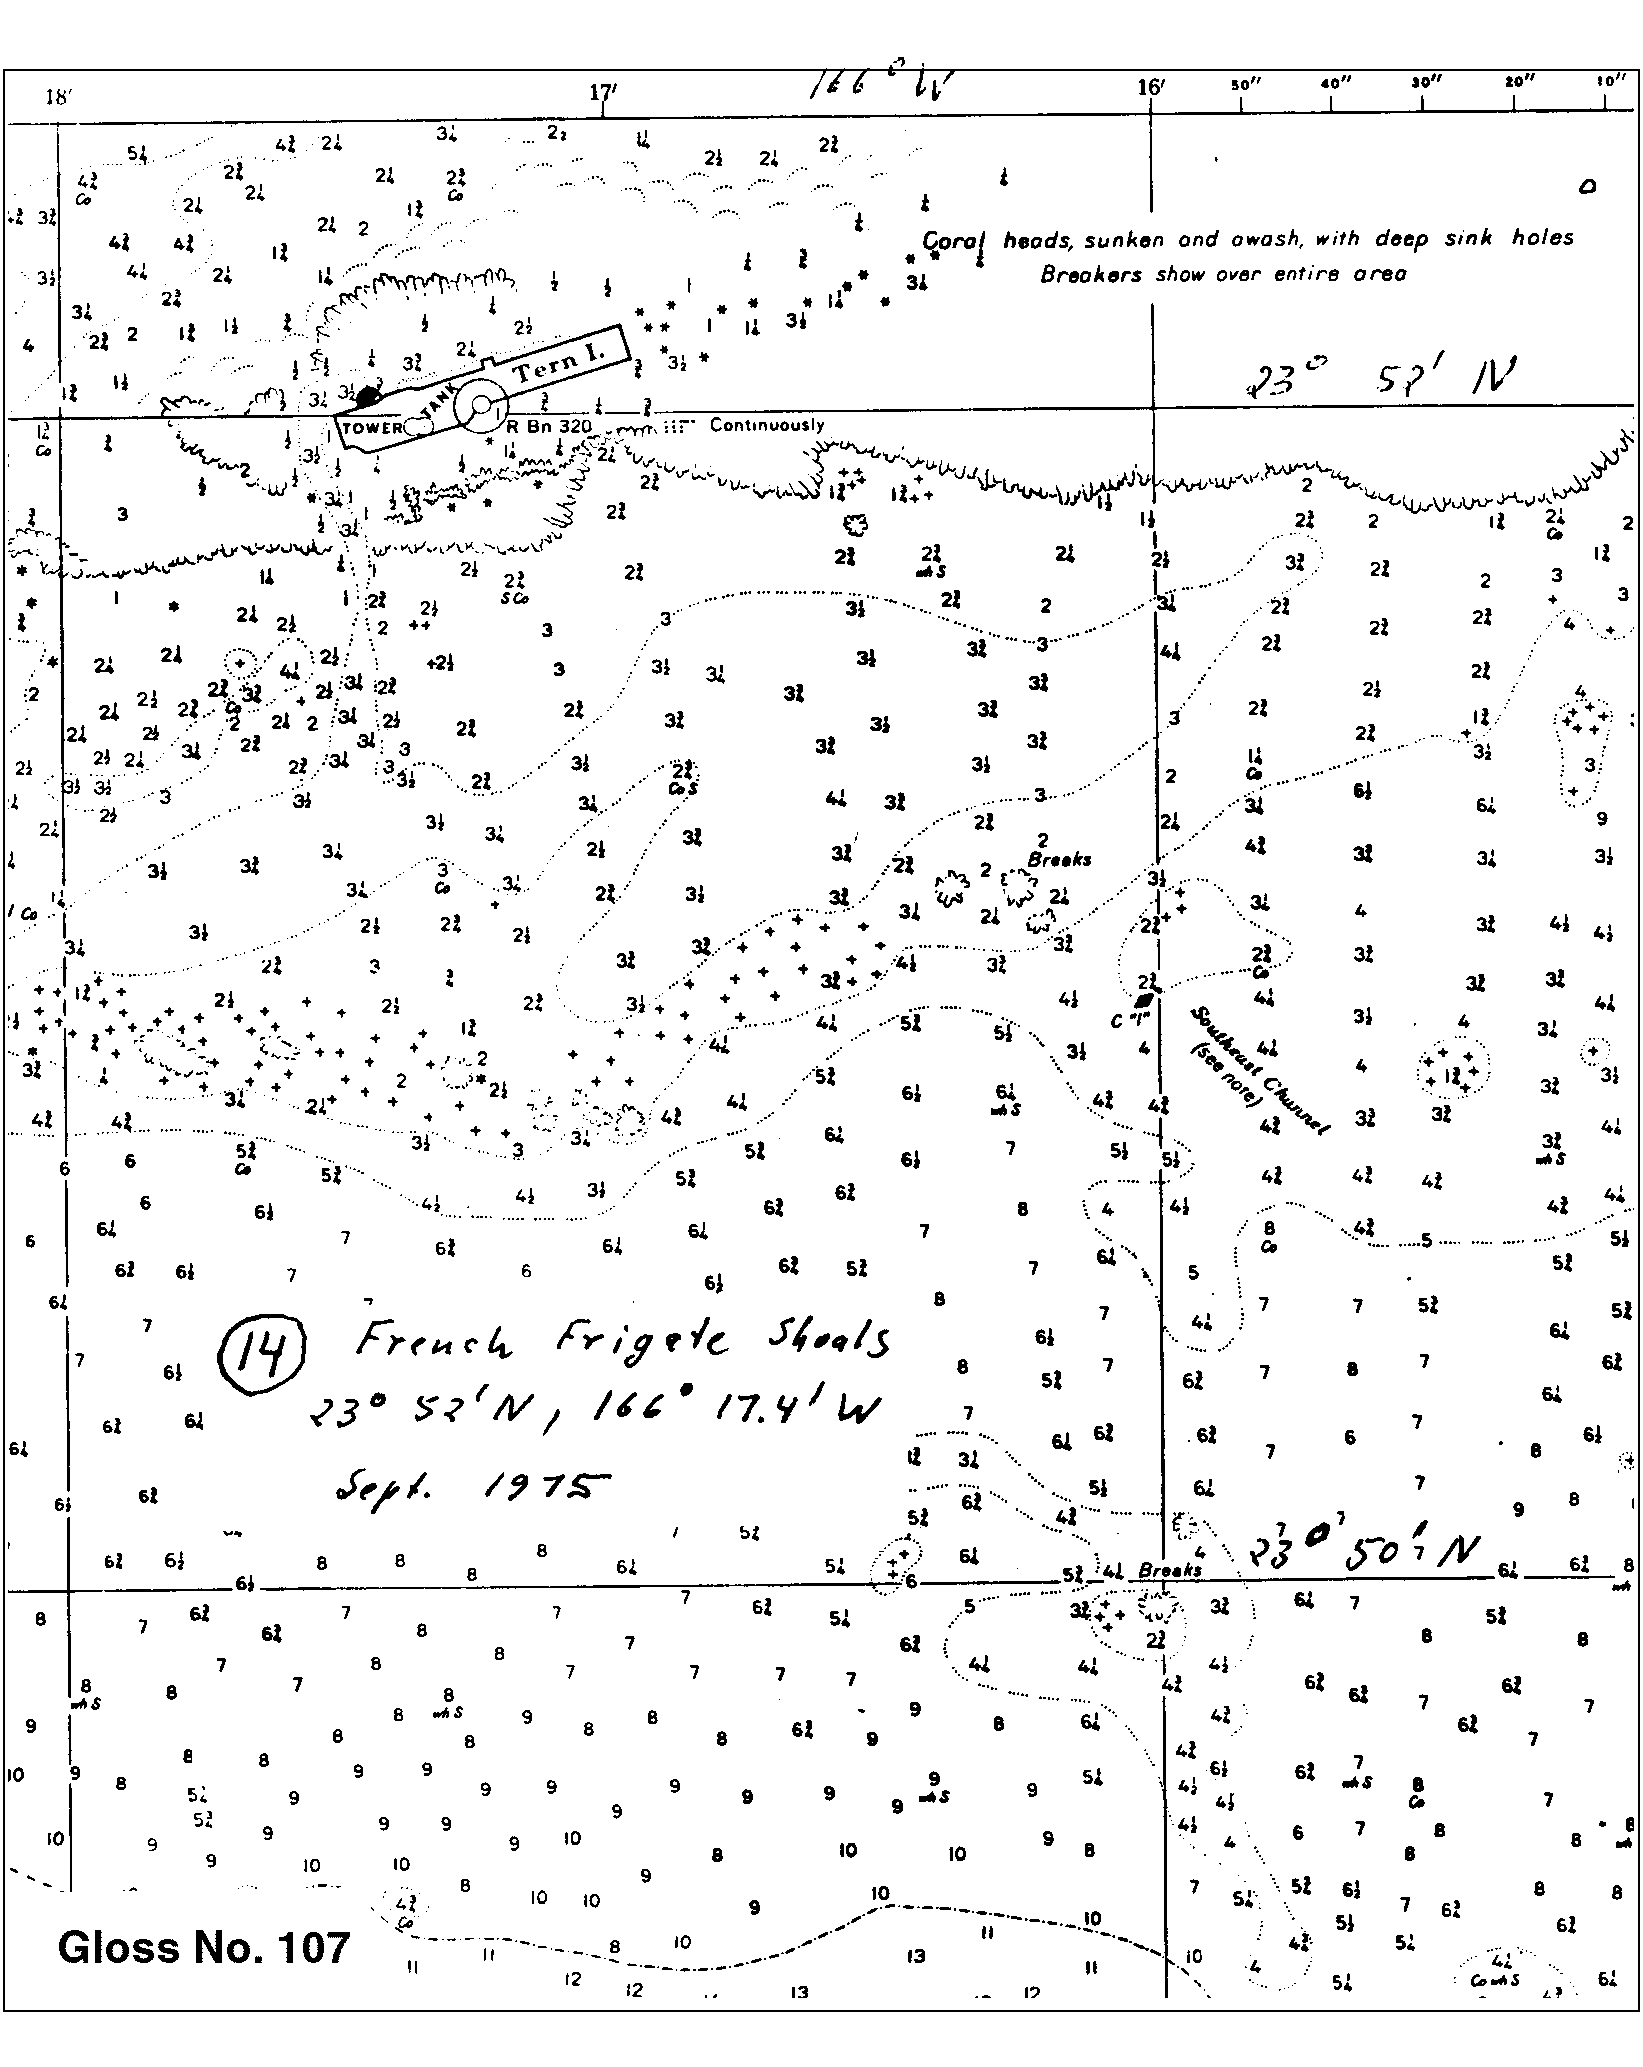 Location map for French Frigate Shoals, H, U.S.A.